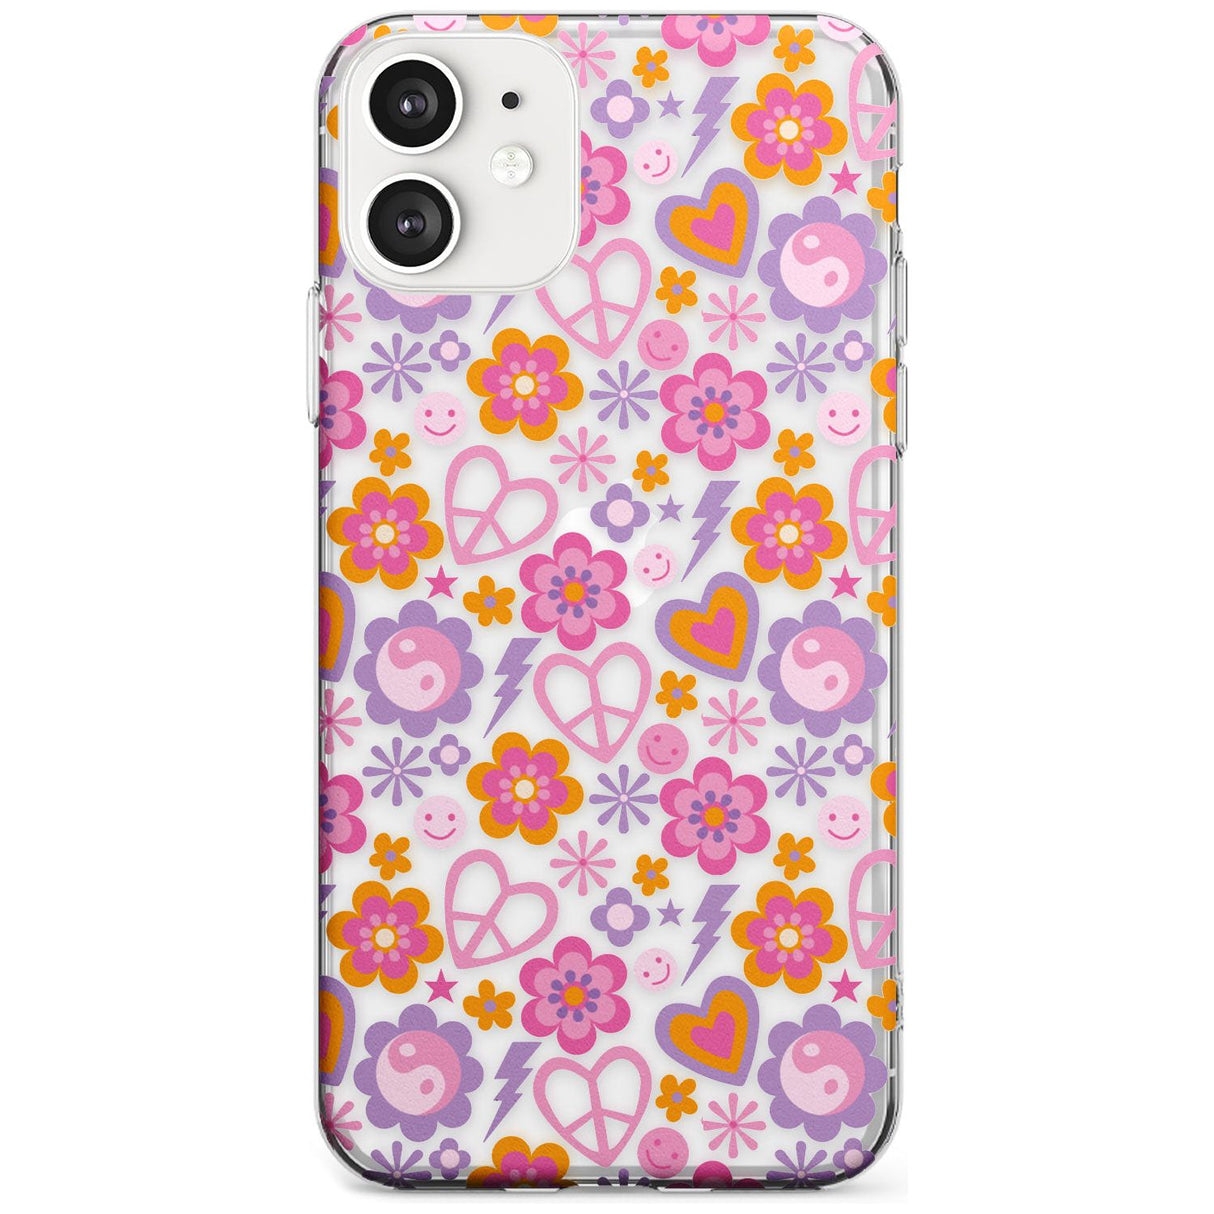 Peace, Love and Flowers Pattern Slim TPU Phone Case for iPhone 11